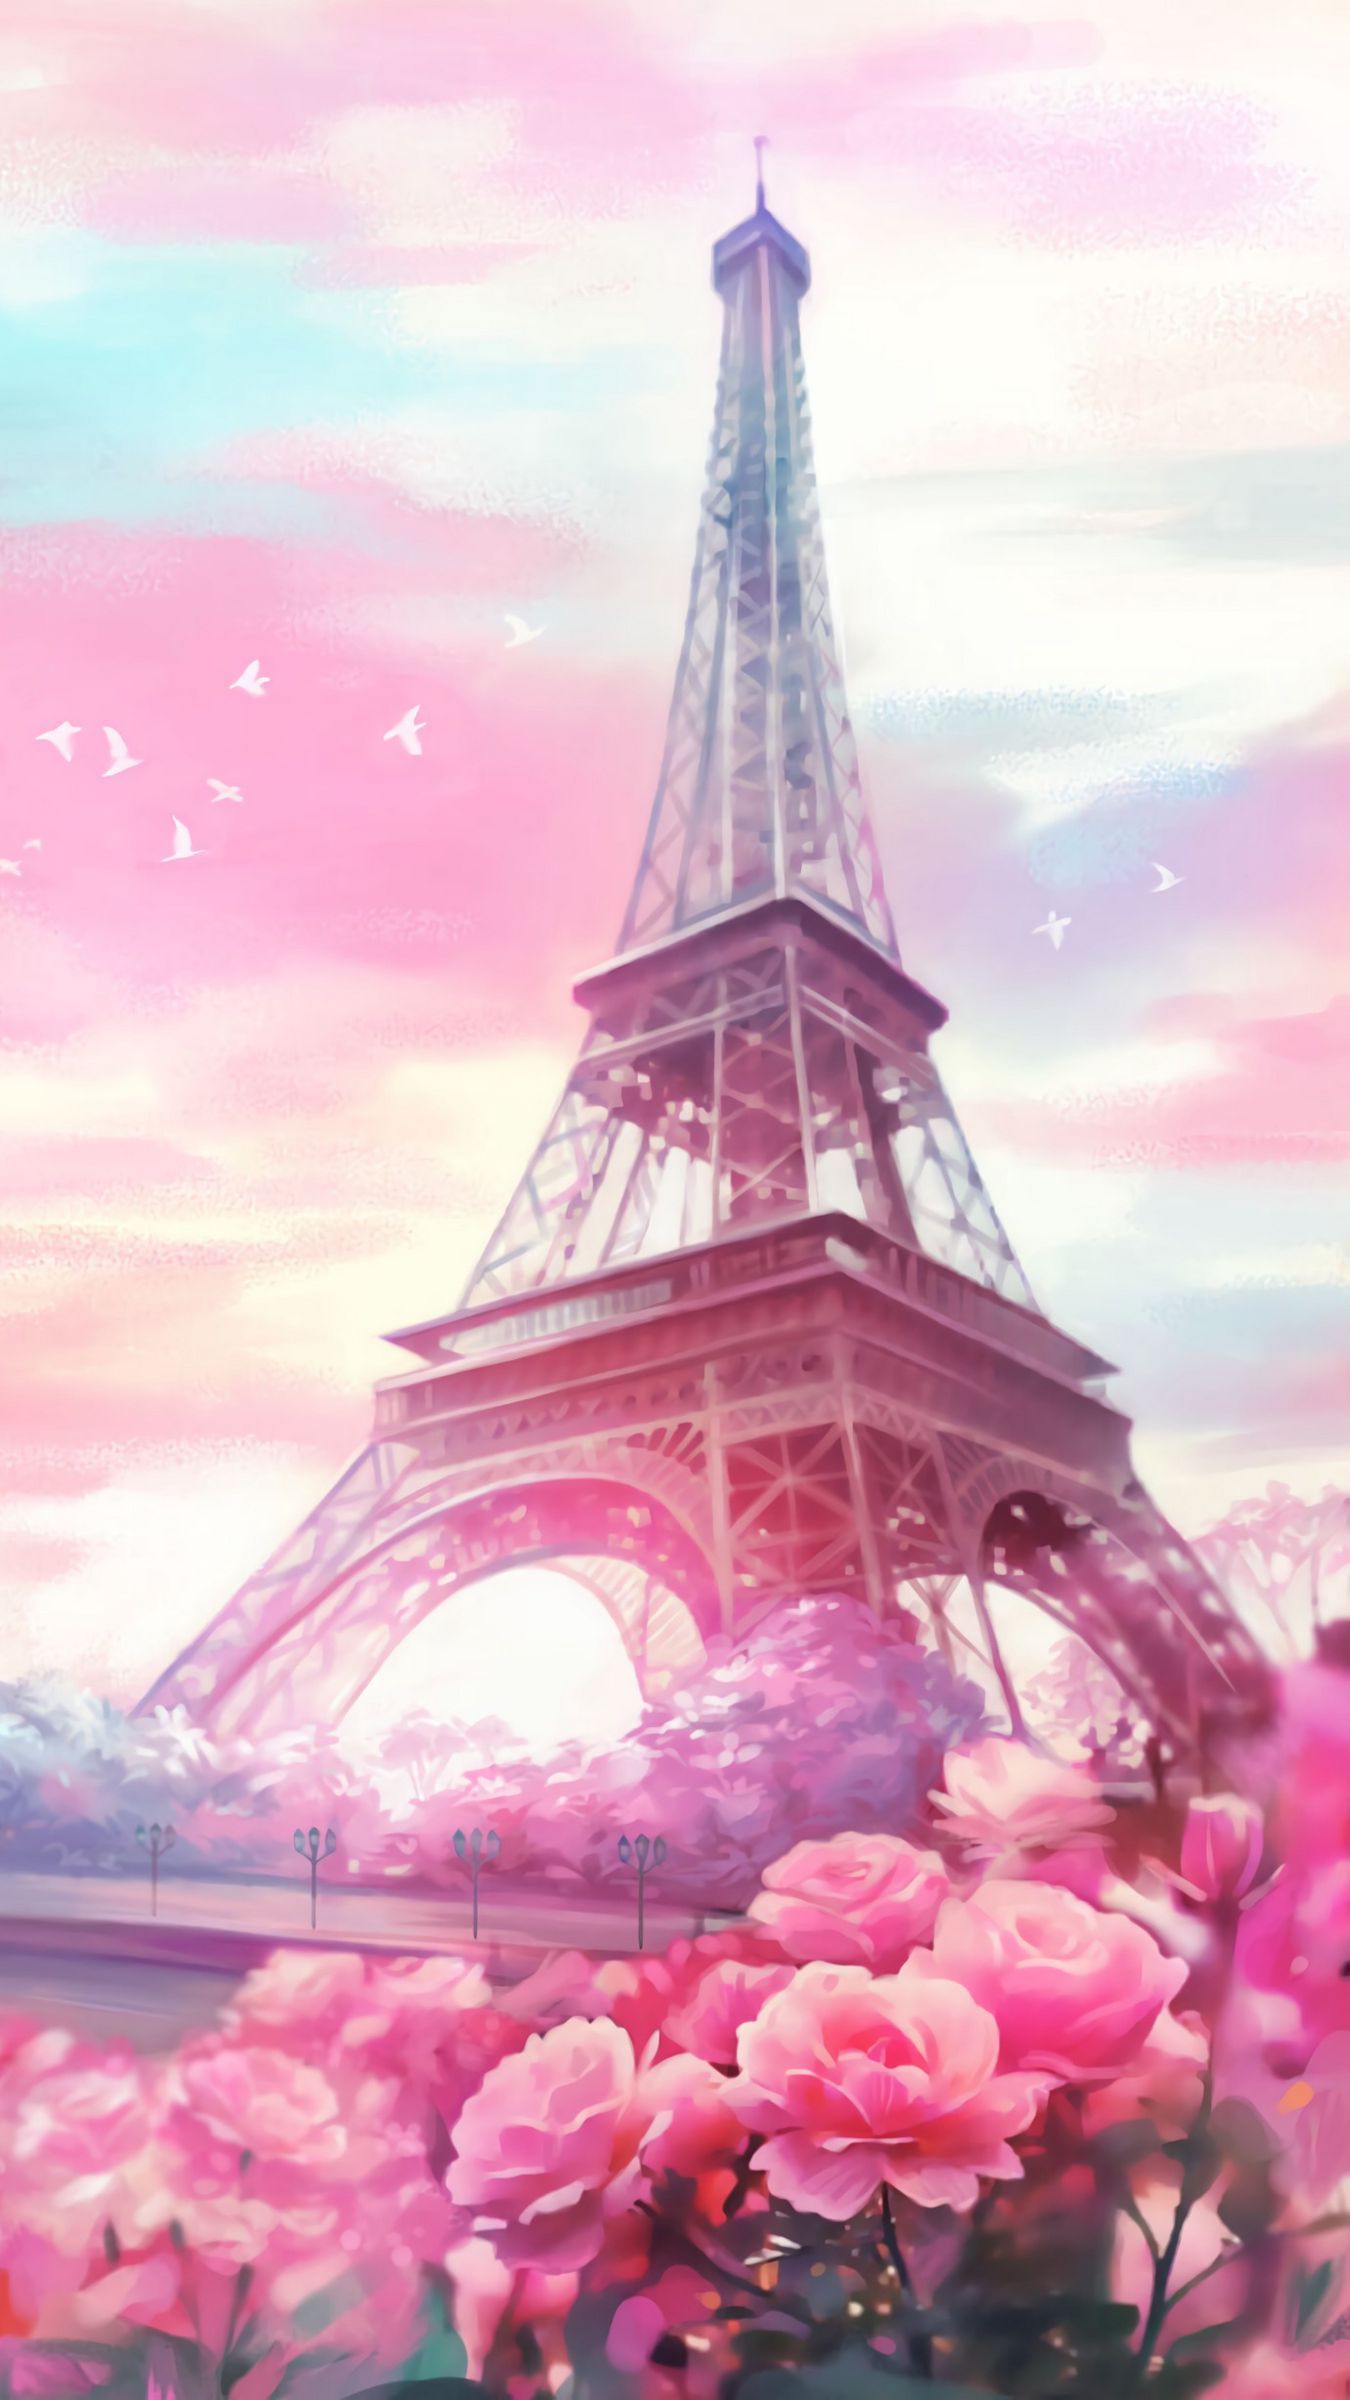 Download wallpaper 1350x2400 paris, flowers, tower, art iphone 8+/7+/6s+/for parallax HD background